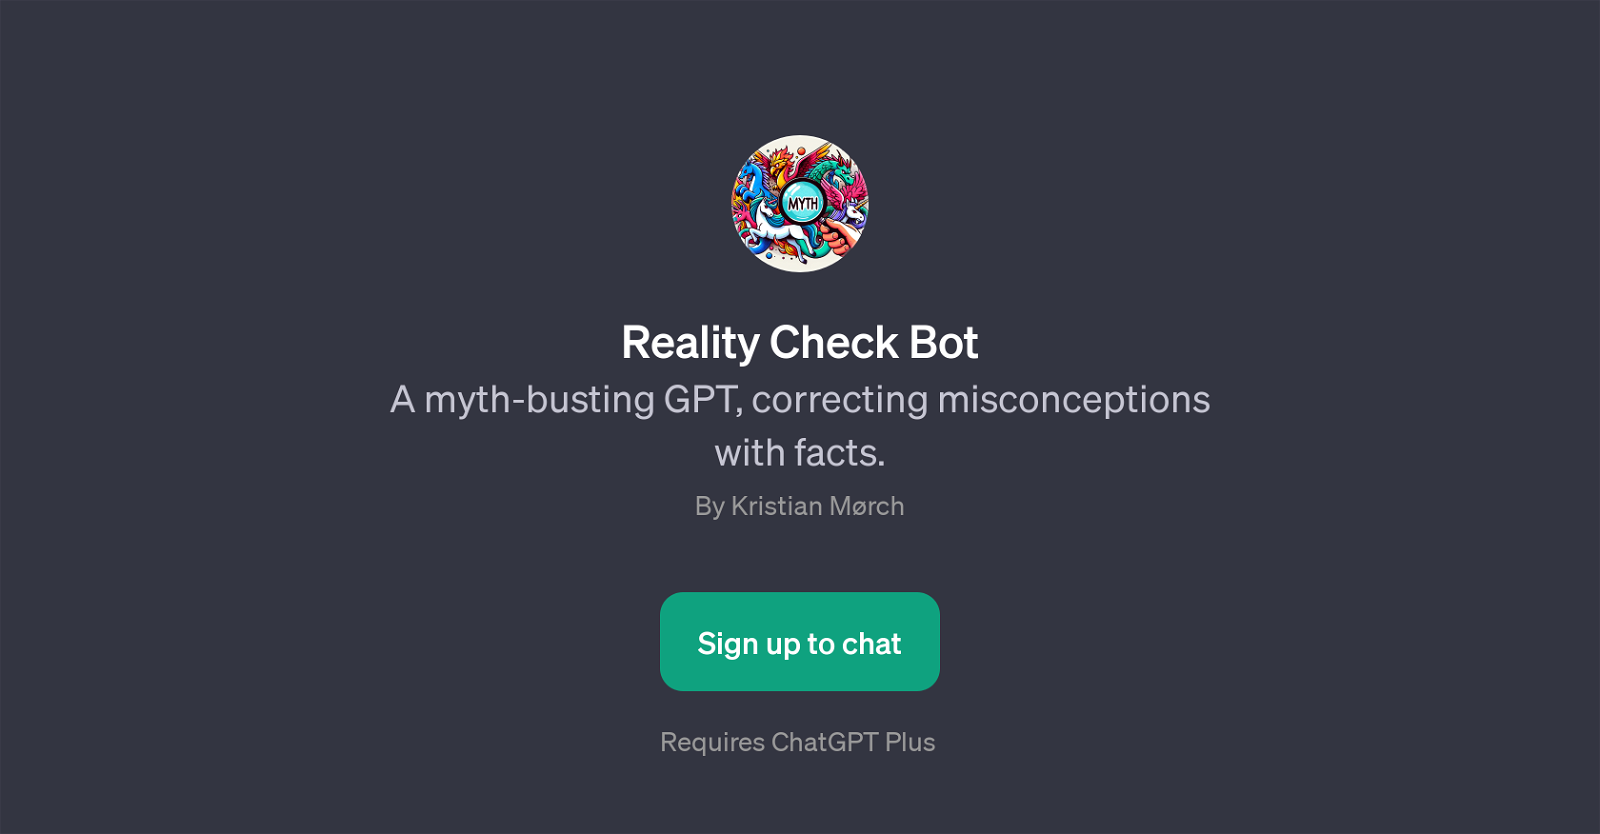 Reality Check Bot website